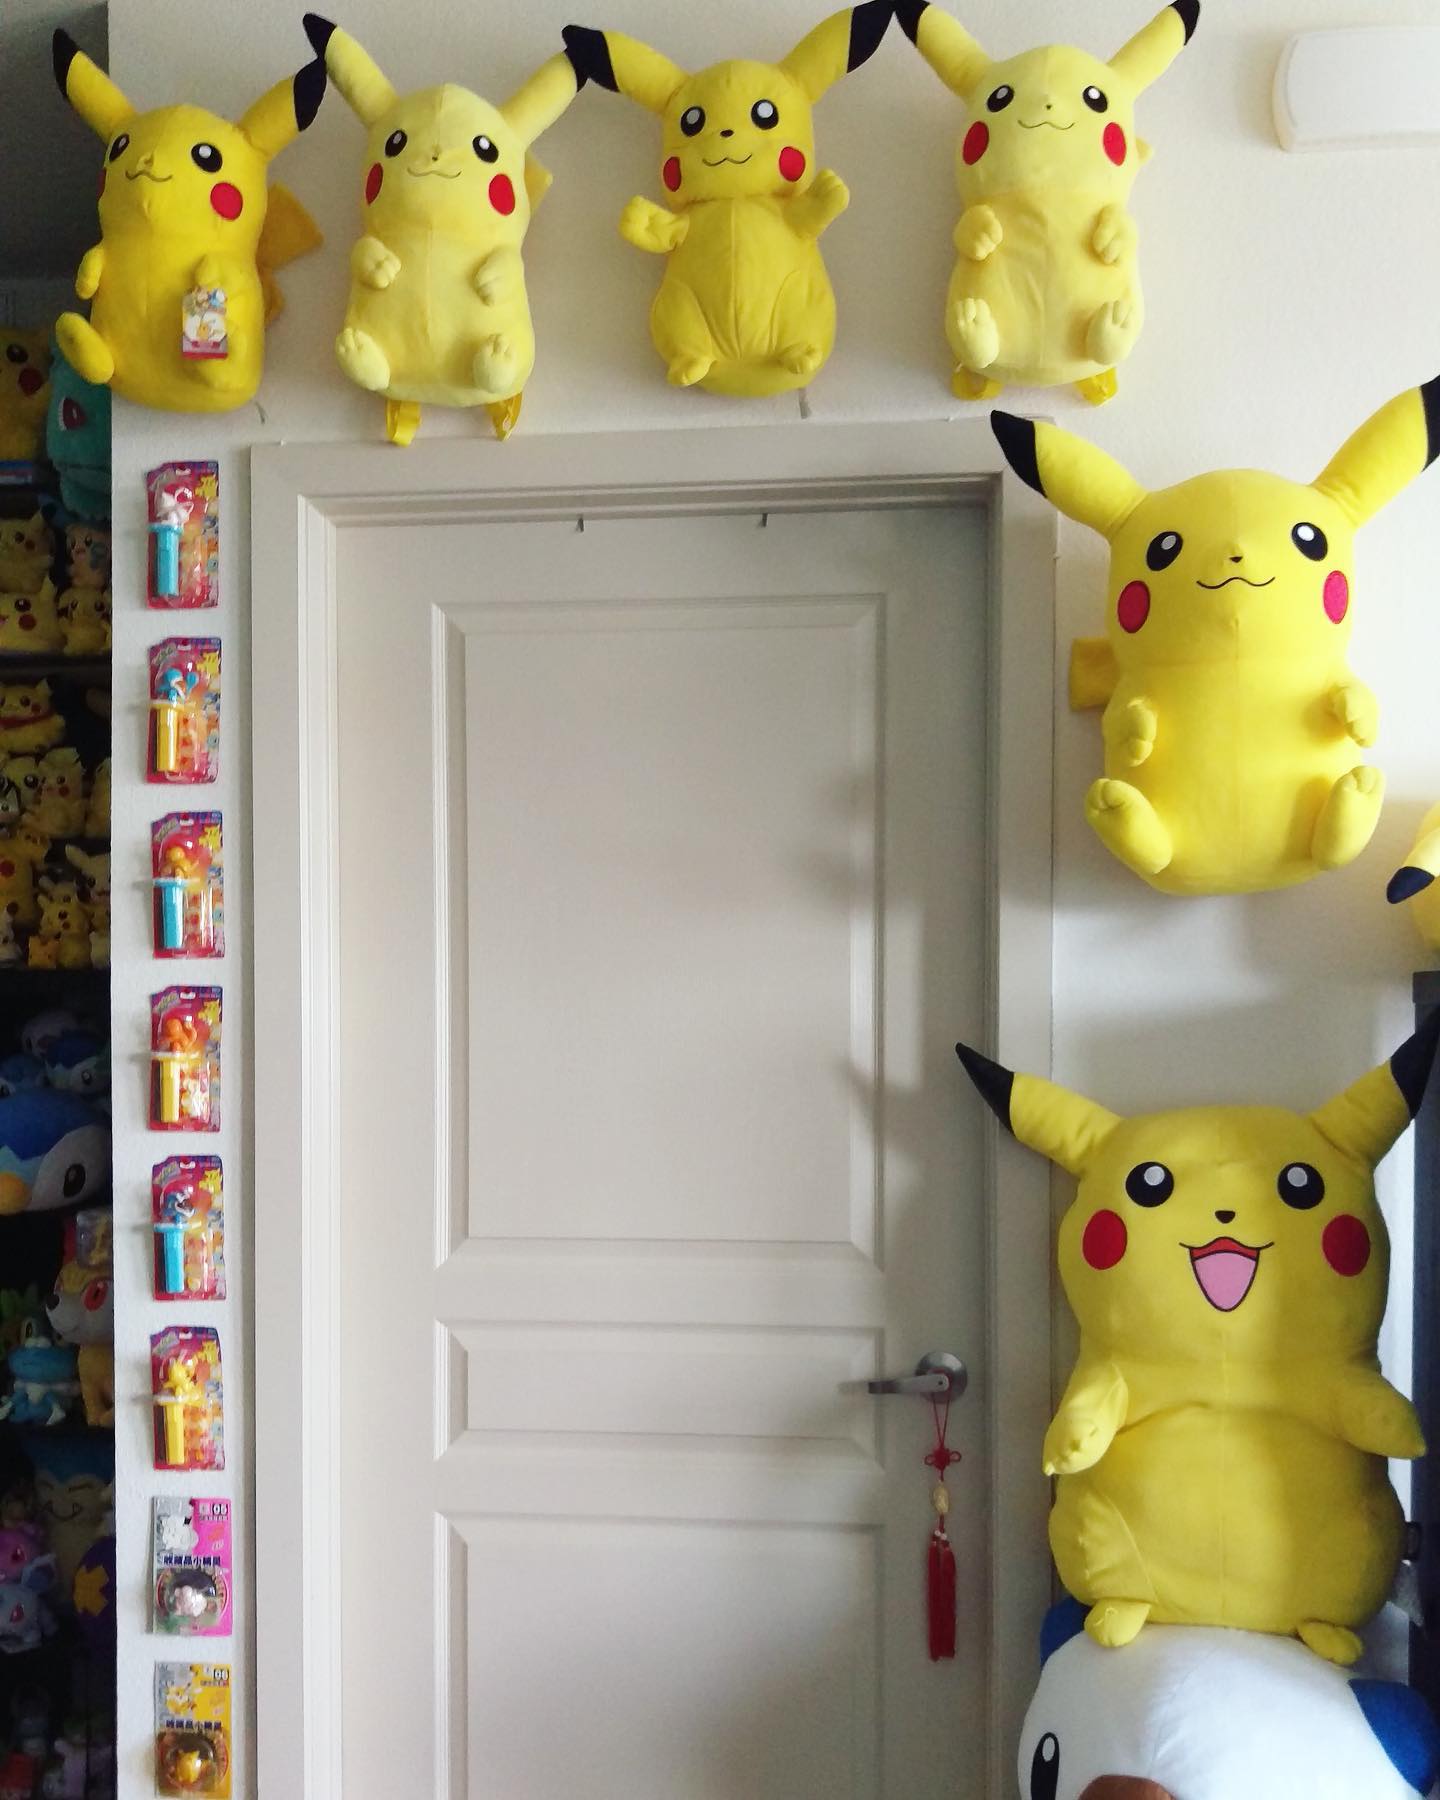 Repost of my best set up for my Pokemon collection when I was in Texas. 🥺 now, it’s all in trash bags in my mom’s attic if any of y’all were wondering. I started a mini collection here in Japan but I’m trying real hard not to expand it too much cause I’m not sure where I’ll be within the next X years.